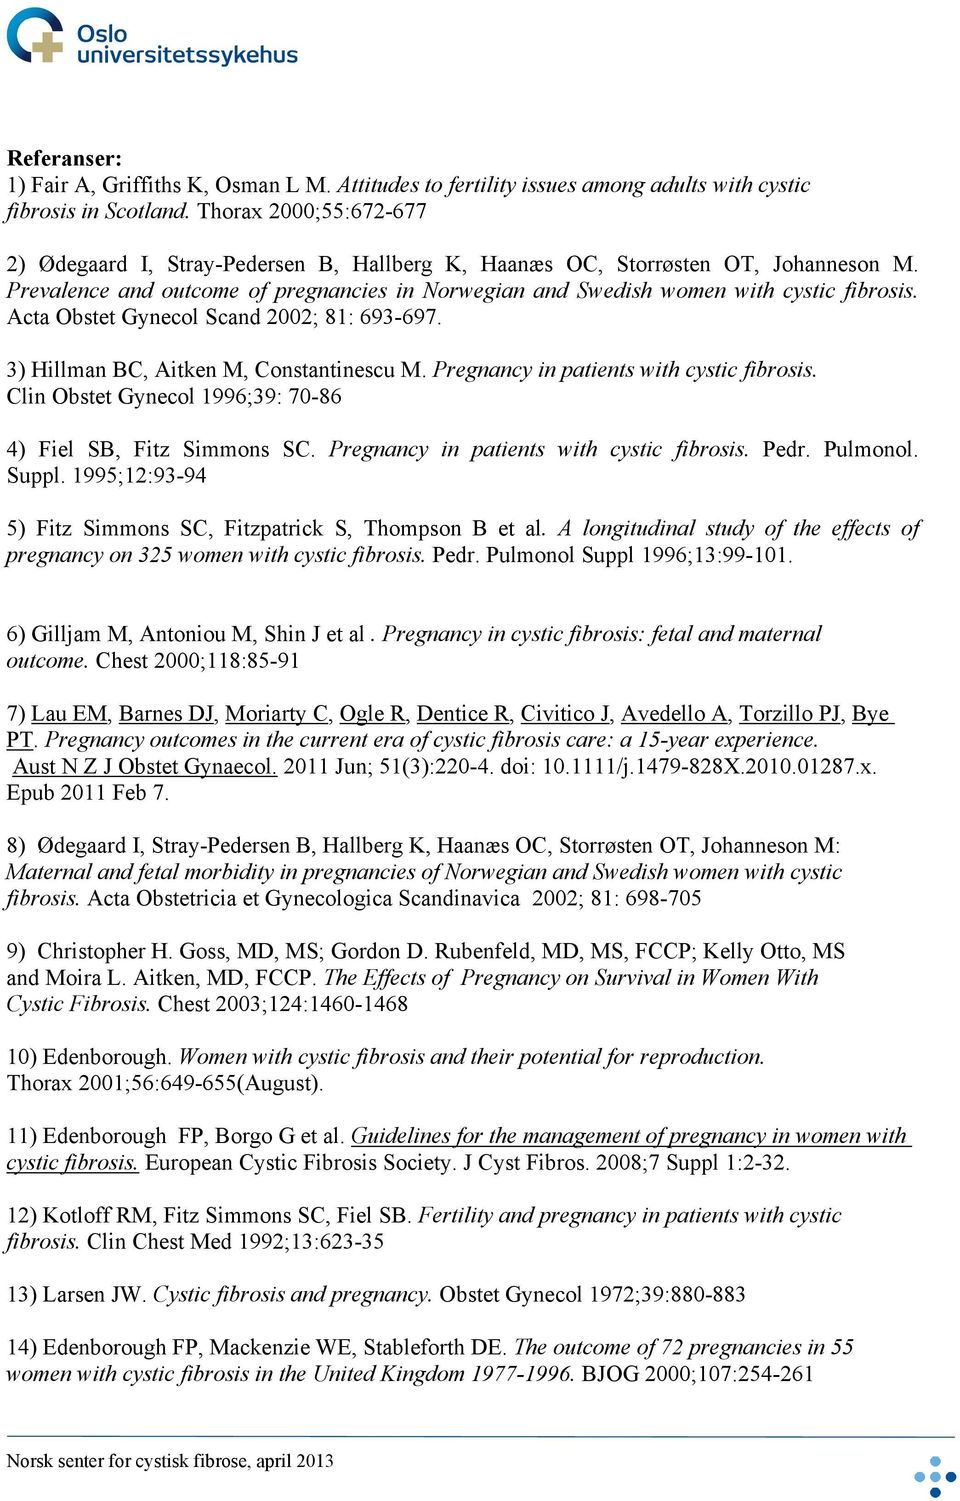 Acta Obstet Gynecol Scand 2002; 81: 693-697. 3) Hillman BC, Aitken M, Constantinescu M. Pregnancy in patients with cystic fibrosis. Clin Obstet Gynecol 1996;39: 70-86 4) Fiel SB, Fitz Simmons SC.